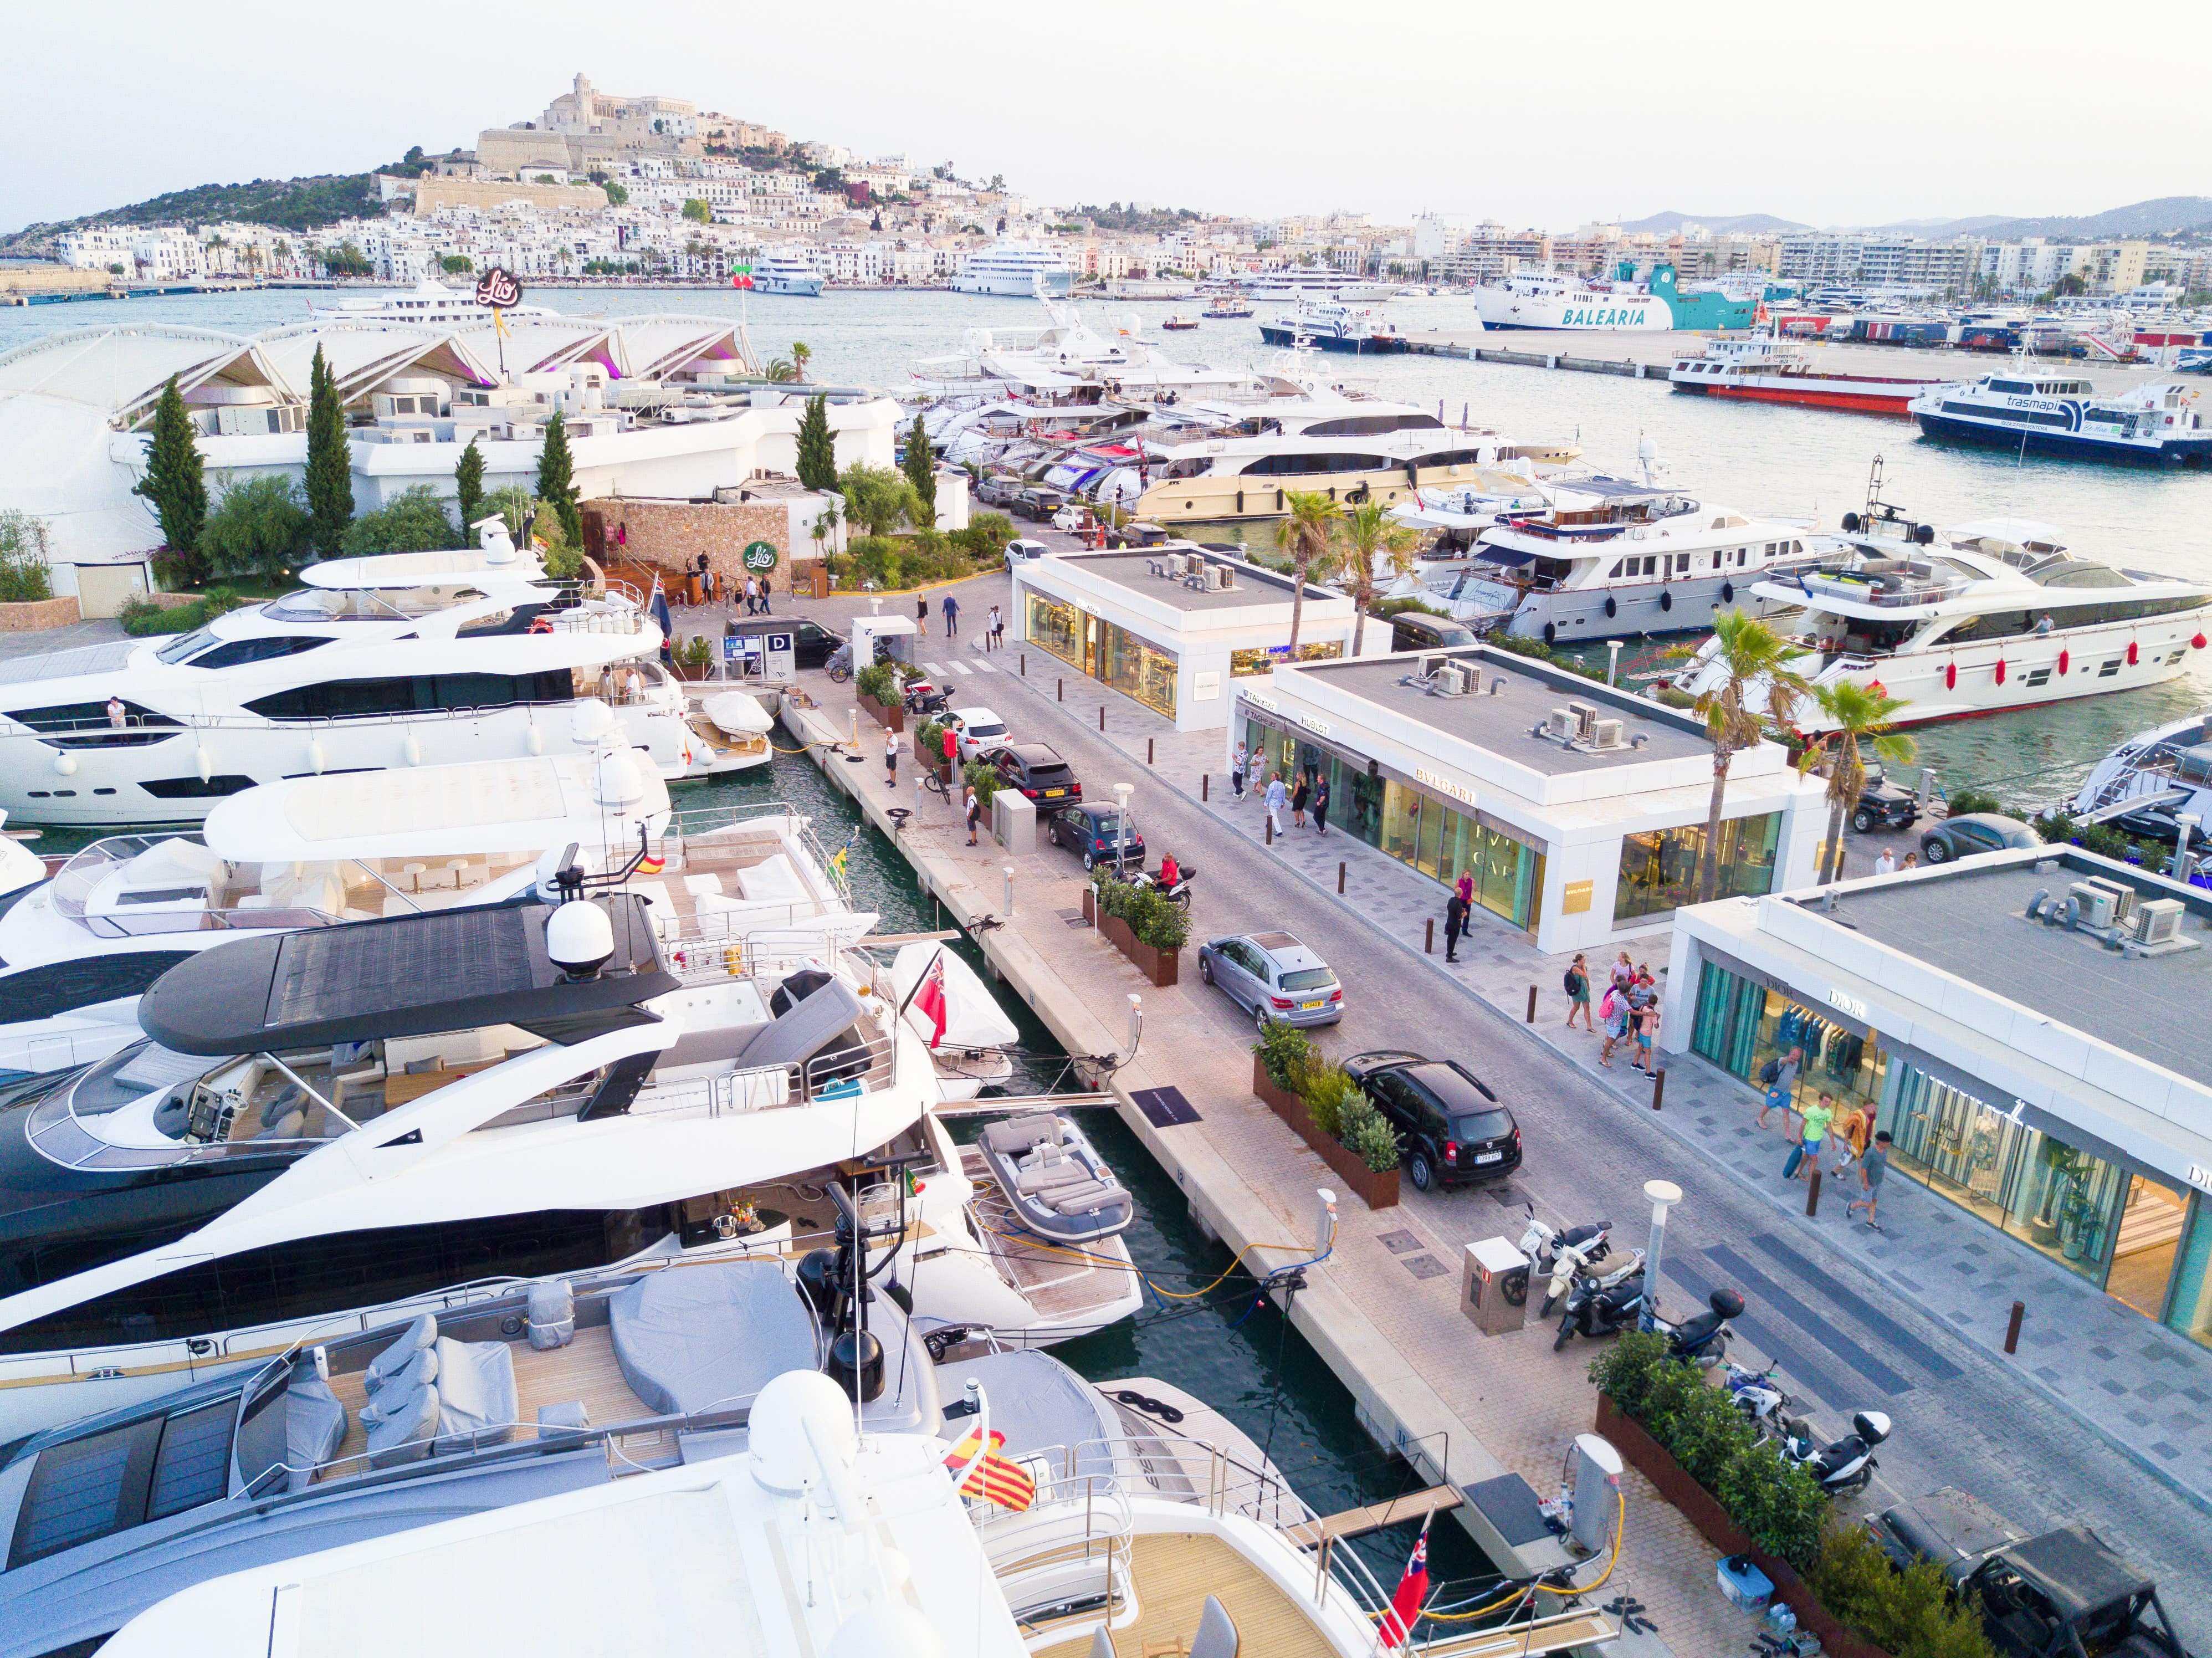 Marina Ibiza - More than a marina, it's a way of life - The most exclusive  brands in the world are in front of your mooring at Marina Ibiza.  #MarinaIbiza #LouisVuitton #Dior #